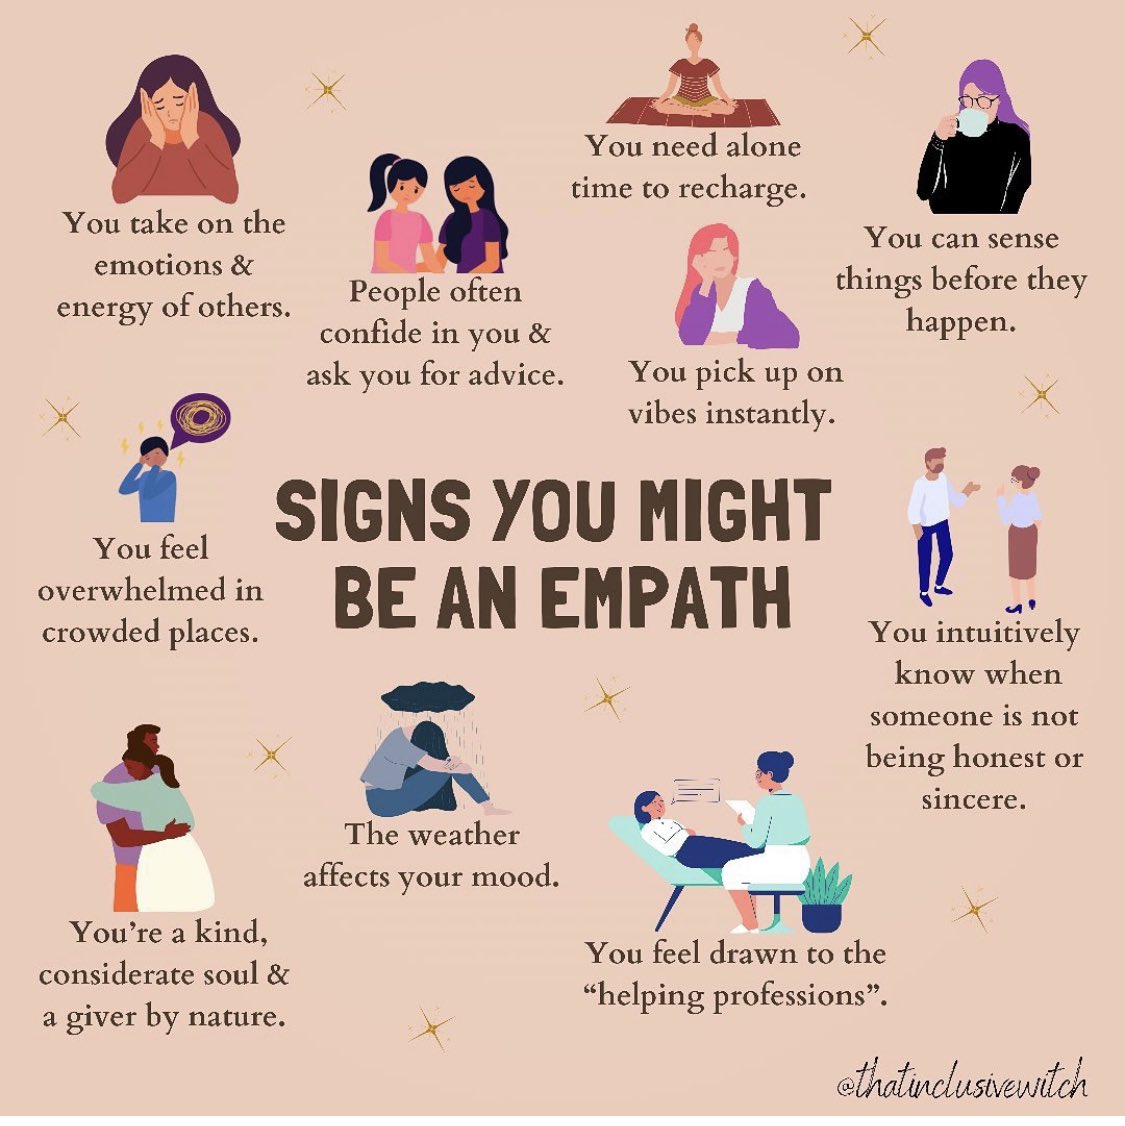 This is me 🙋🏽‍♀️
Sometime it a gift and other times it can feel like a curse. 

But I am who I am. 

#Empath
#Worldonmyshoulders